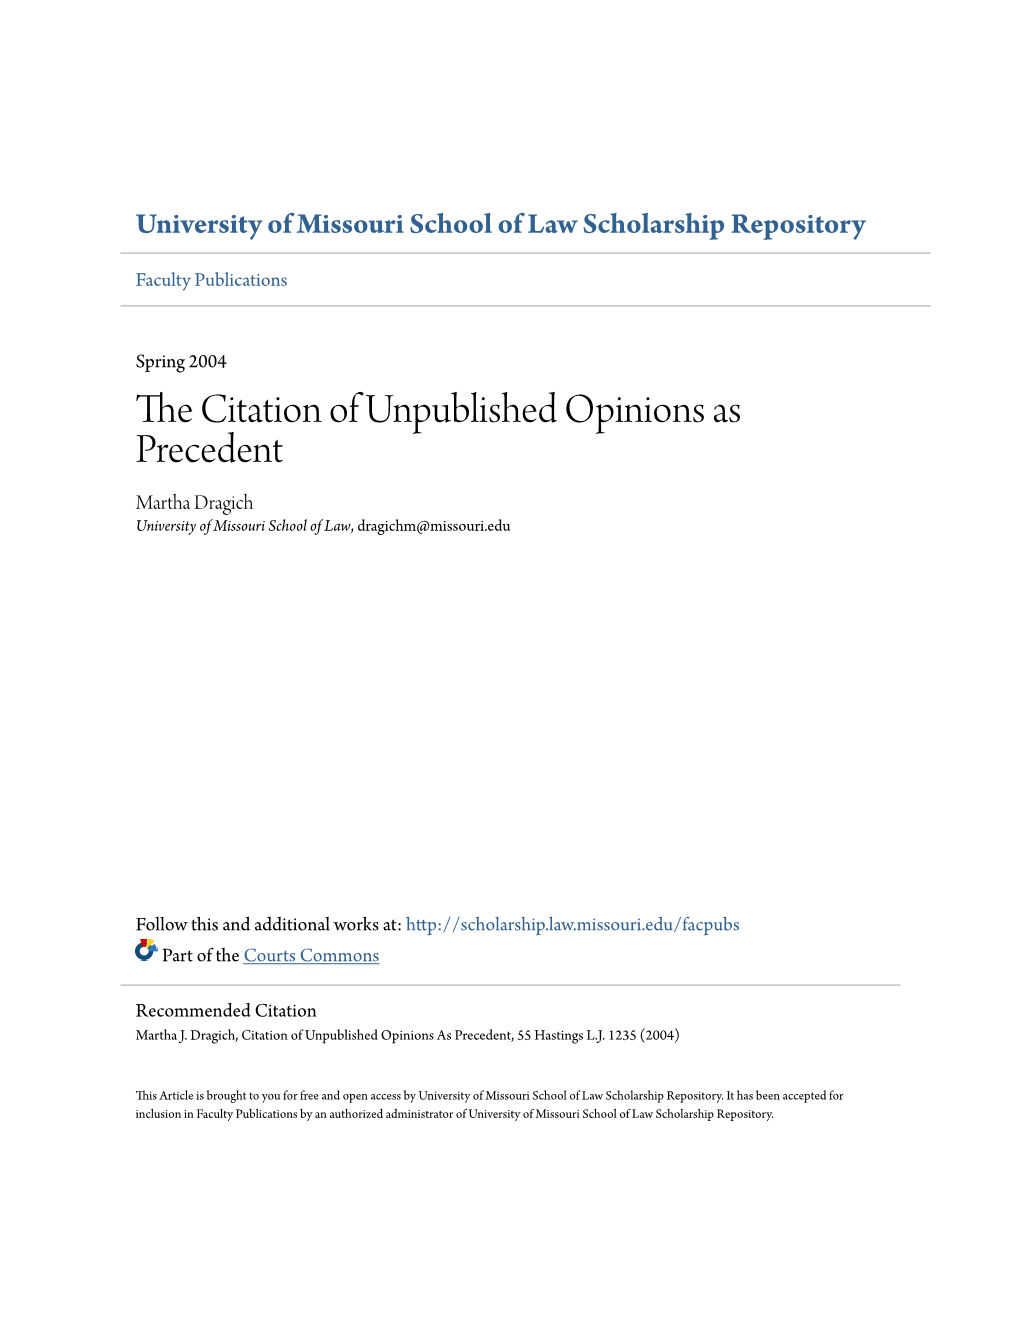 The Citation of Unpublished Opinions As Precedent